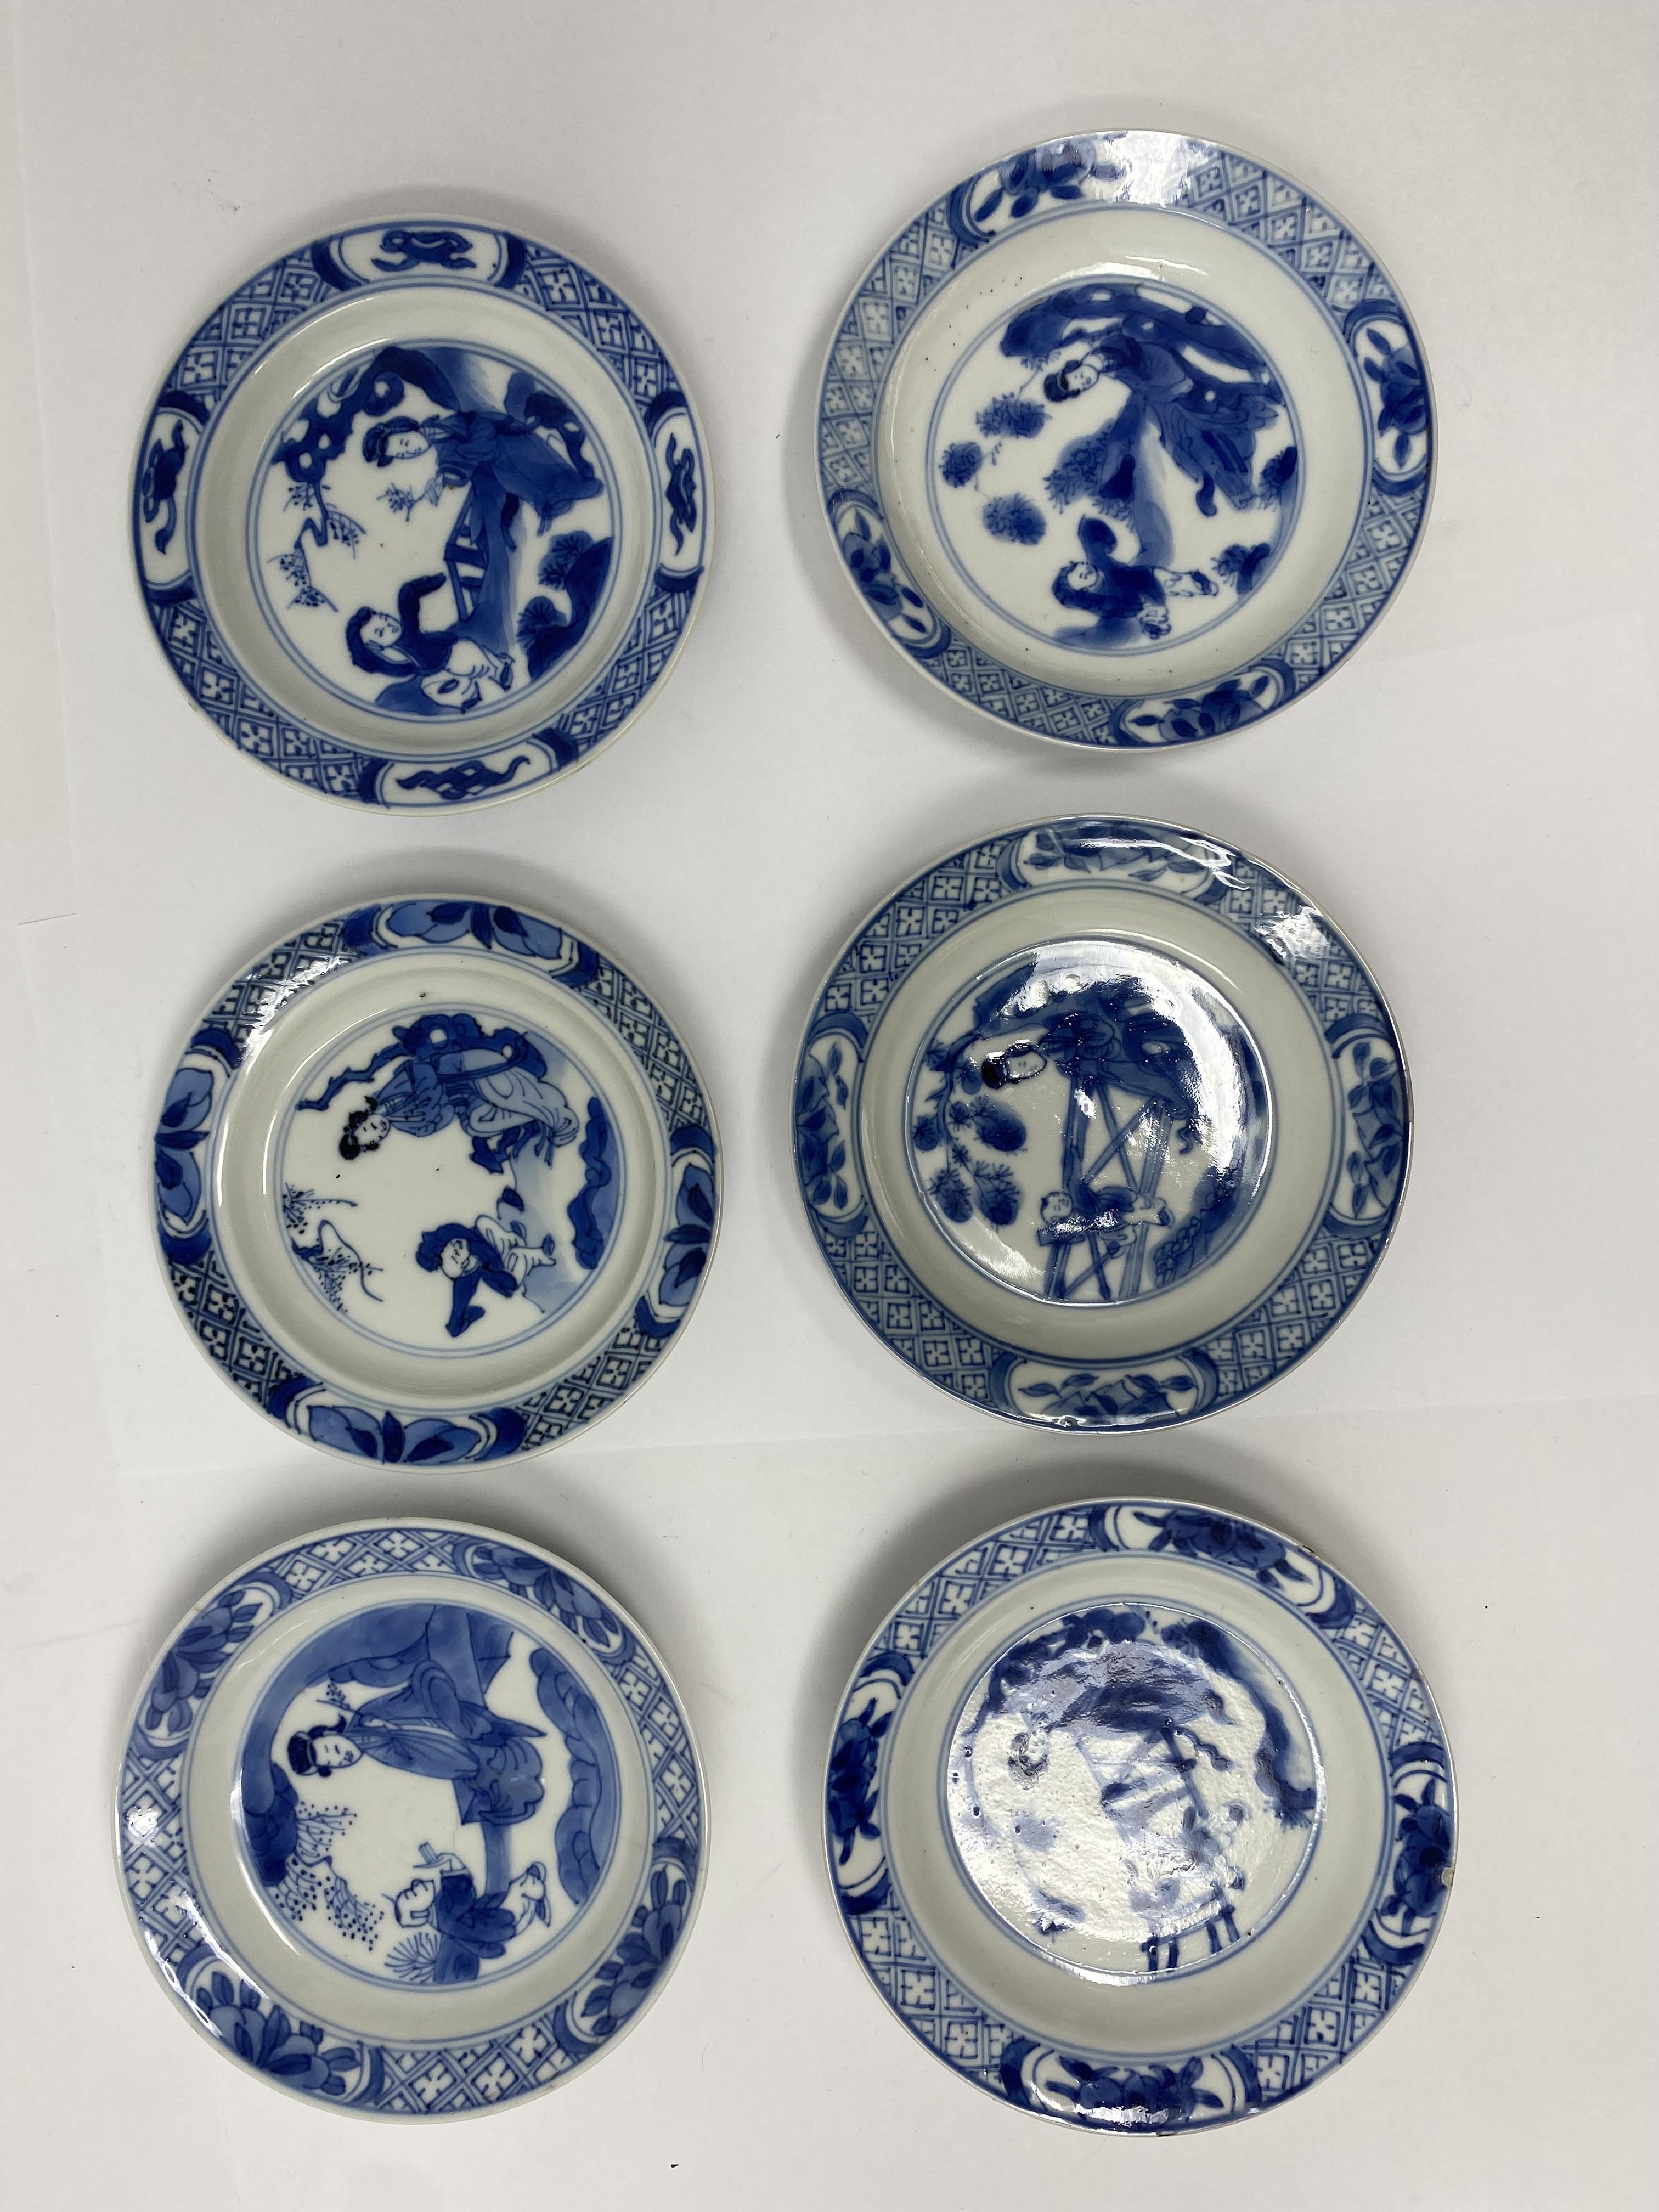 SIX SMALL MATCHED CHINESE BLUE AND WHITE DISHES. QING DYNASTY, KANGXI PERIOD (1662-1722) - Image 2 of 4